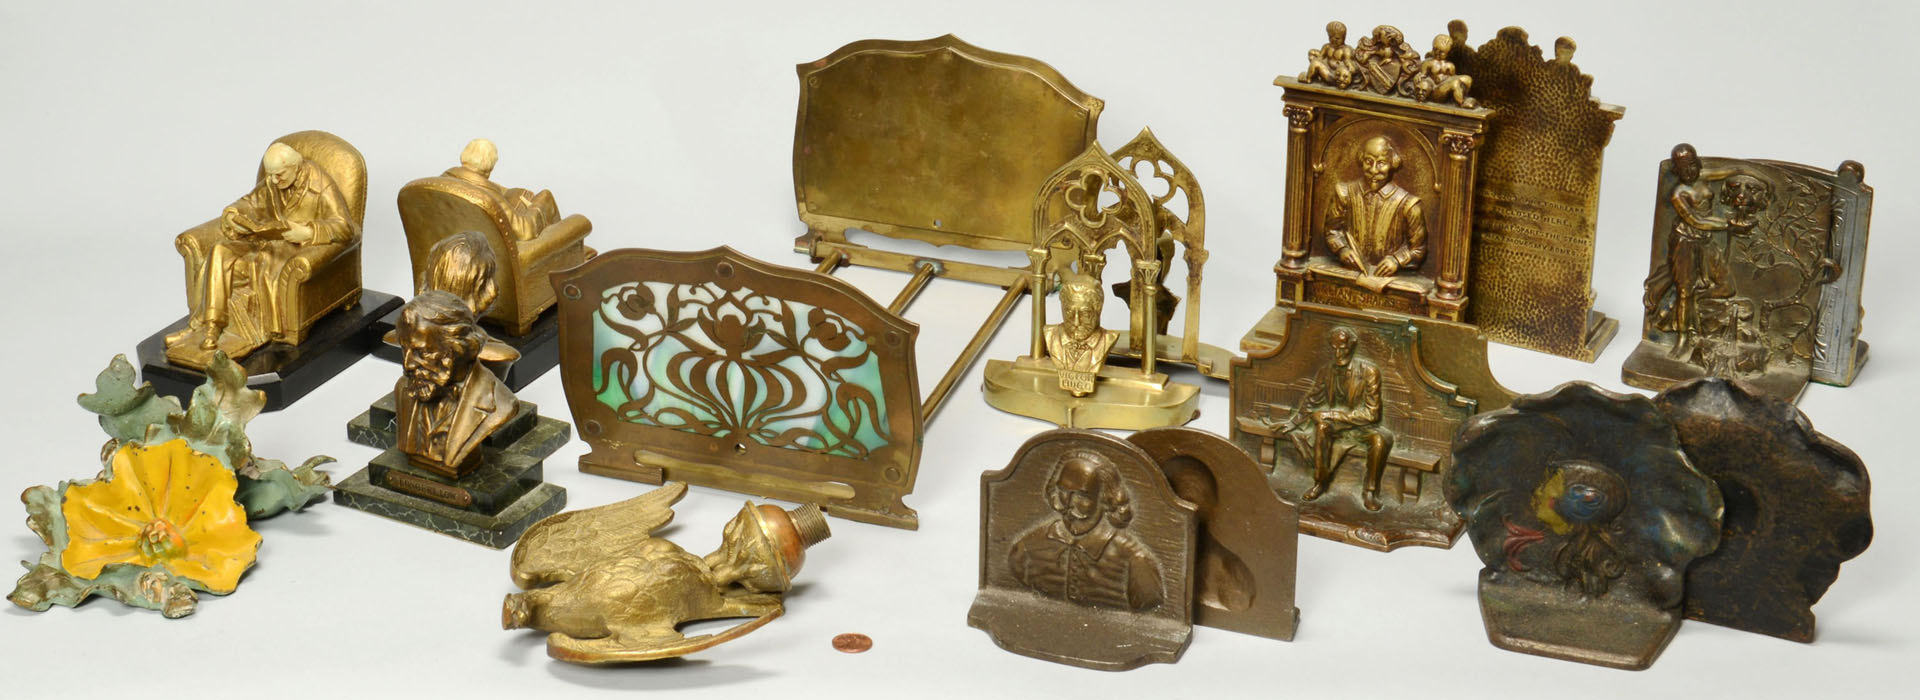 Lot 275: Group of 11 Pairs of Bookends, mostly bronze